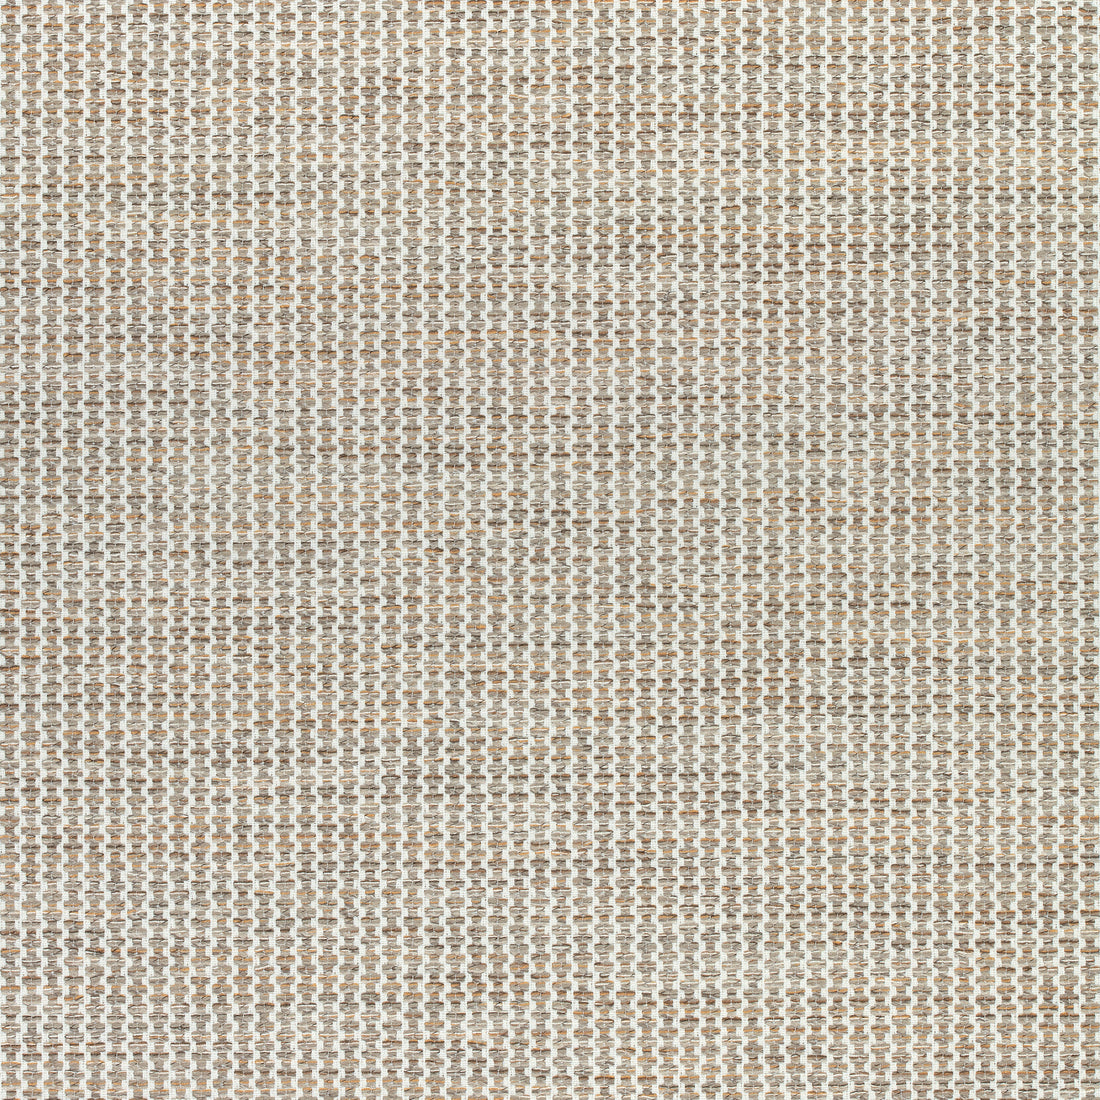 Ryder fabric in sand color - pattern number W74084 - by Thibaut in the Cadence collection